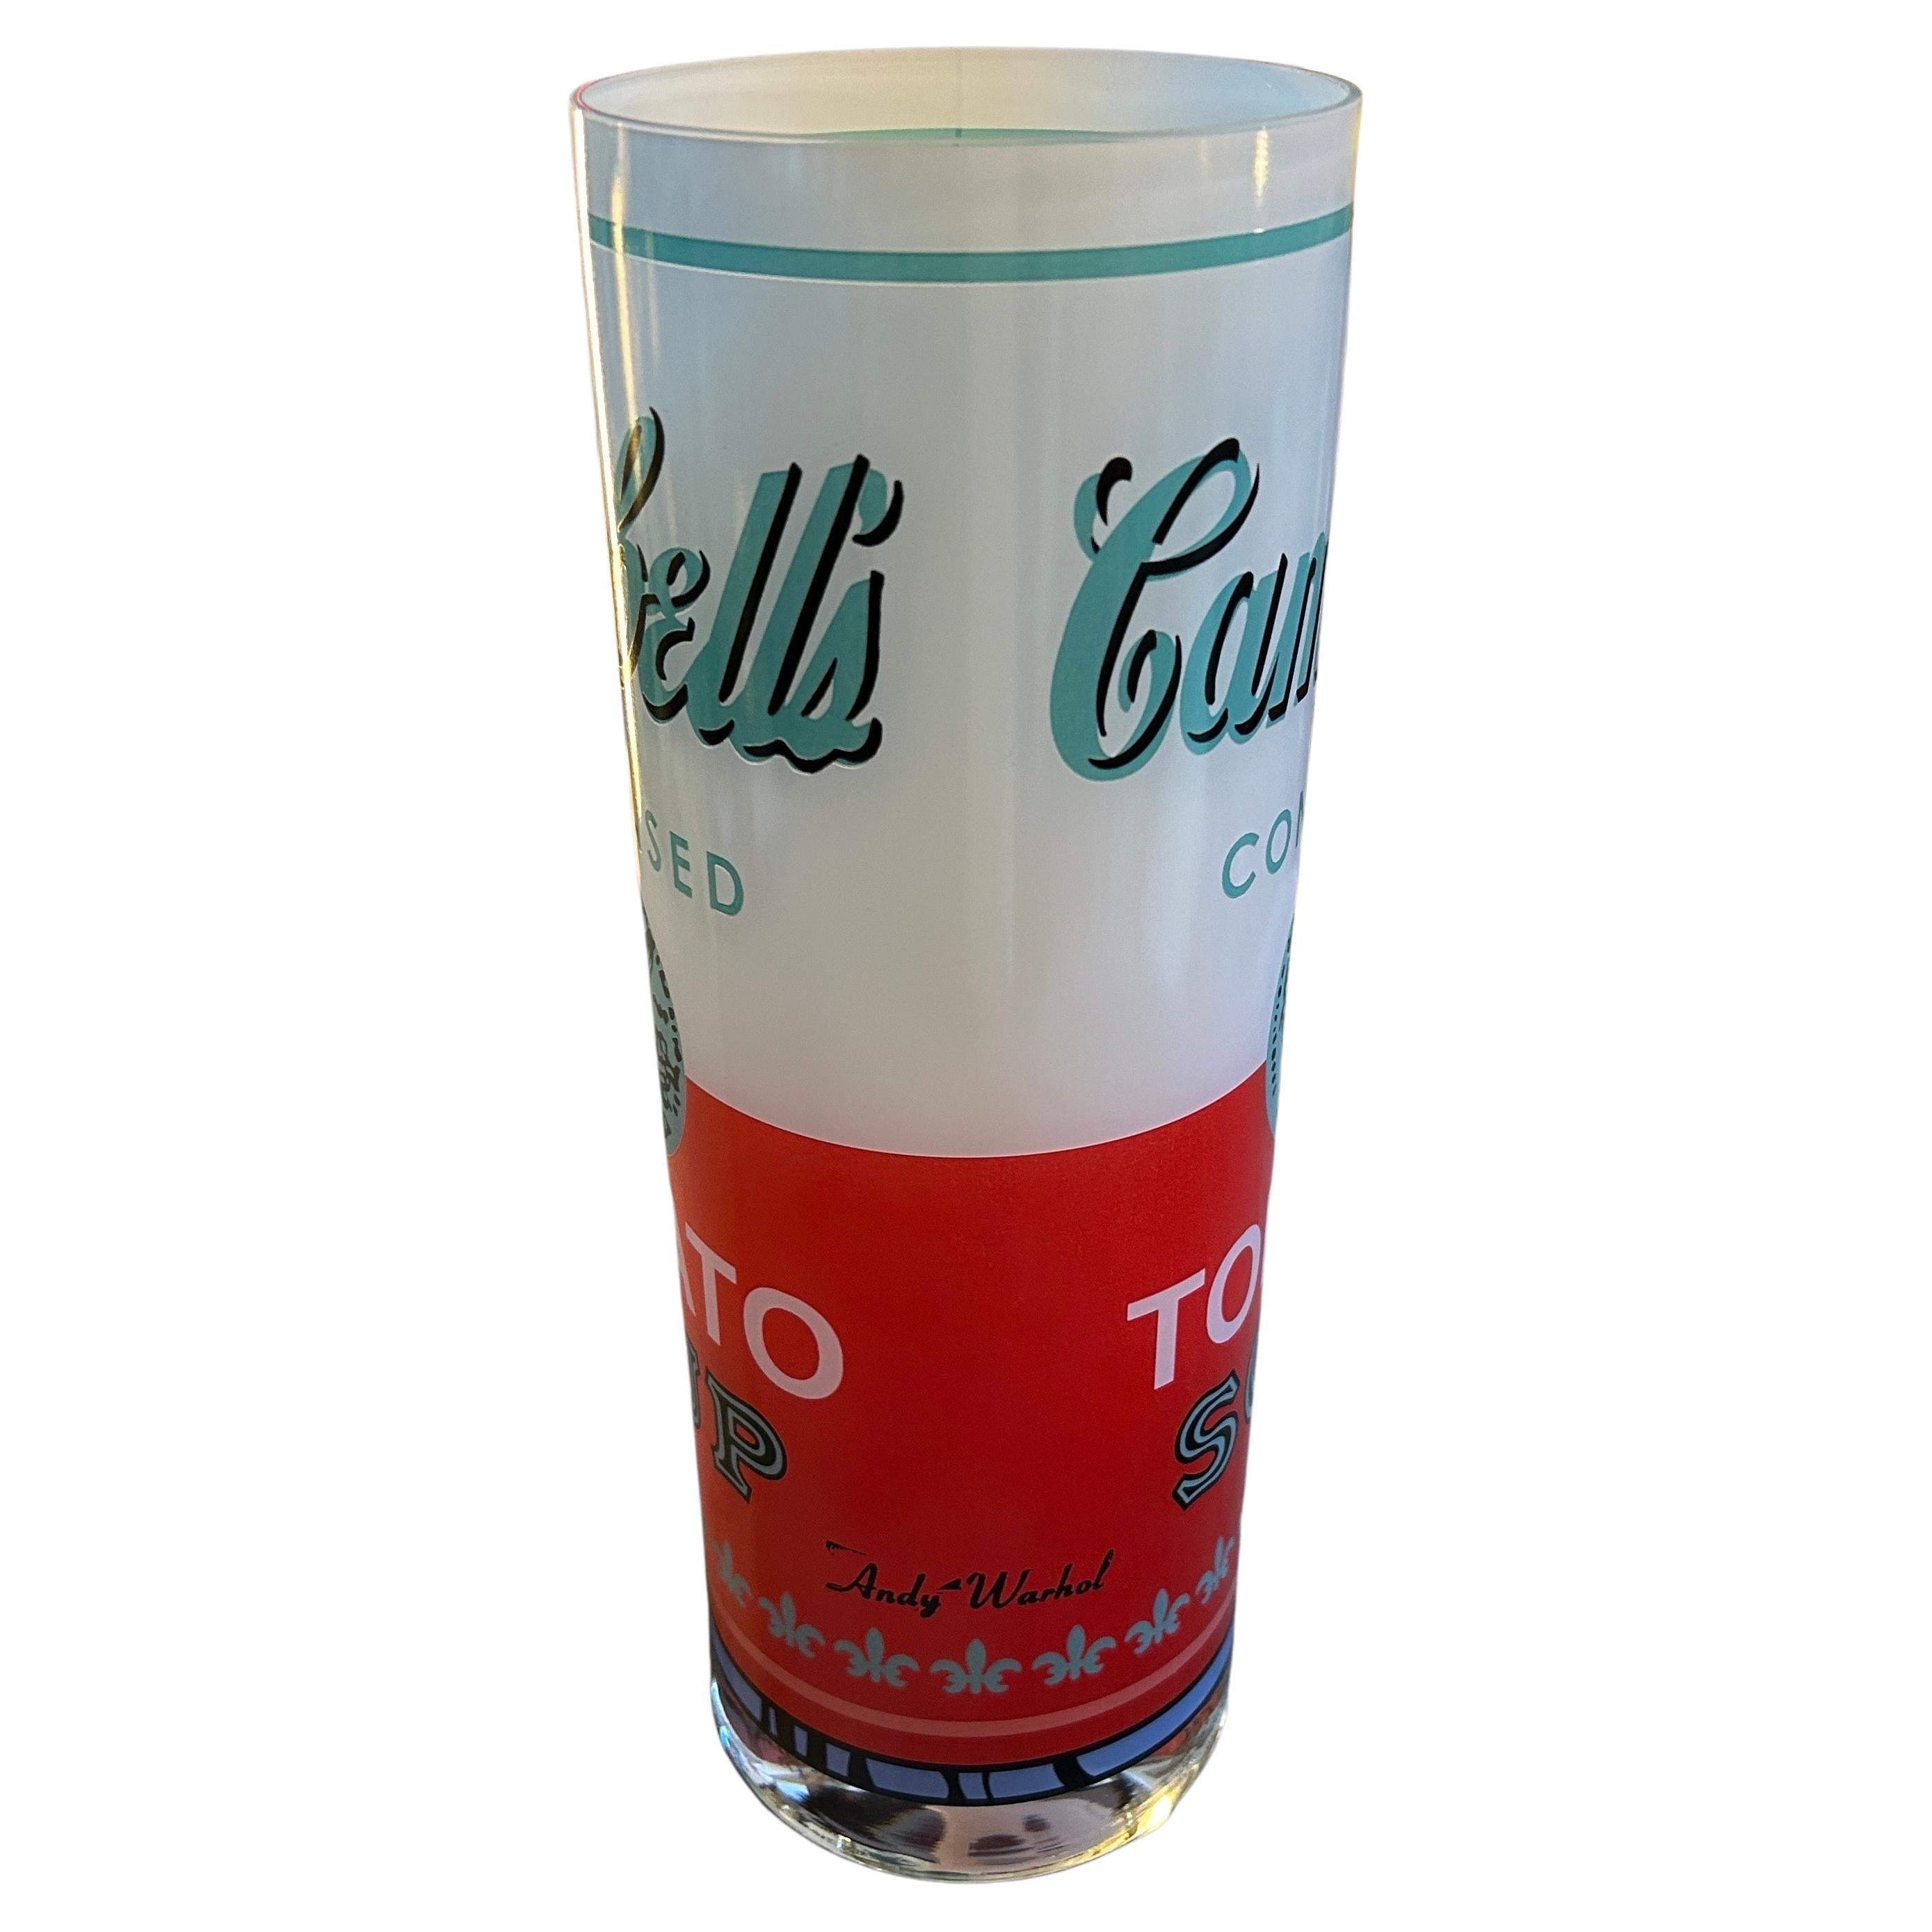 The Rosenthal Campbell soup glass vase designed by Andy Warhol is a piece of pop art that captures the iconic imagery of the Campbell's Soup can in a functional and stylish manner. The vase of high-quality glass, with a smooth and glossy surface